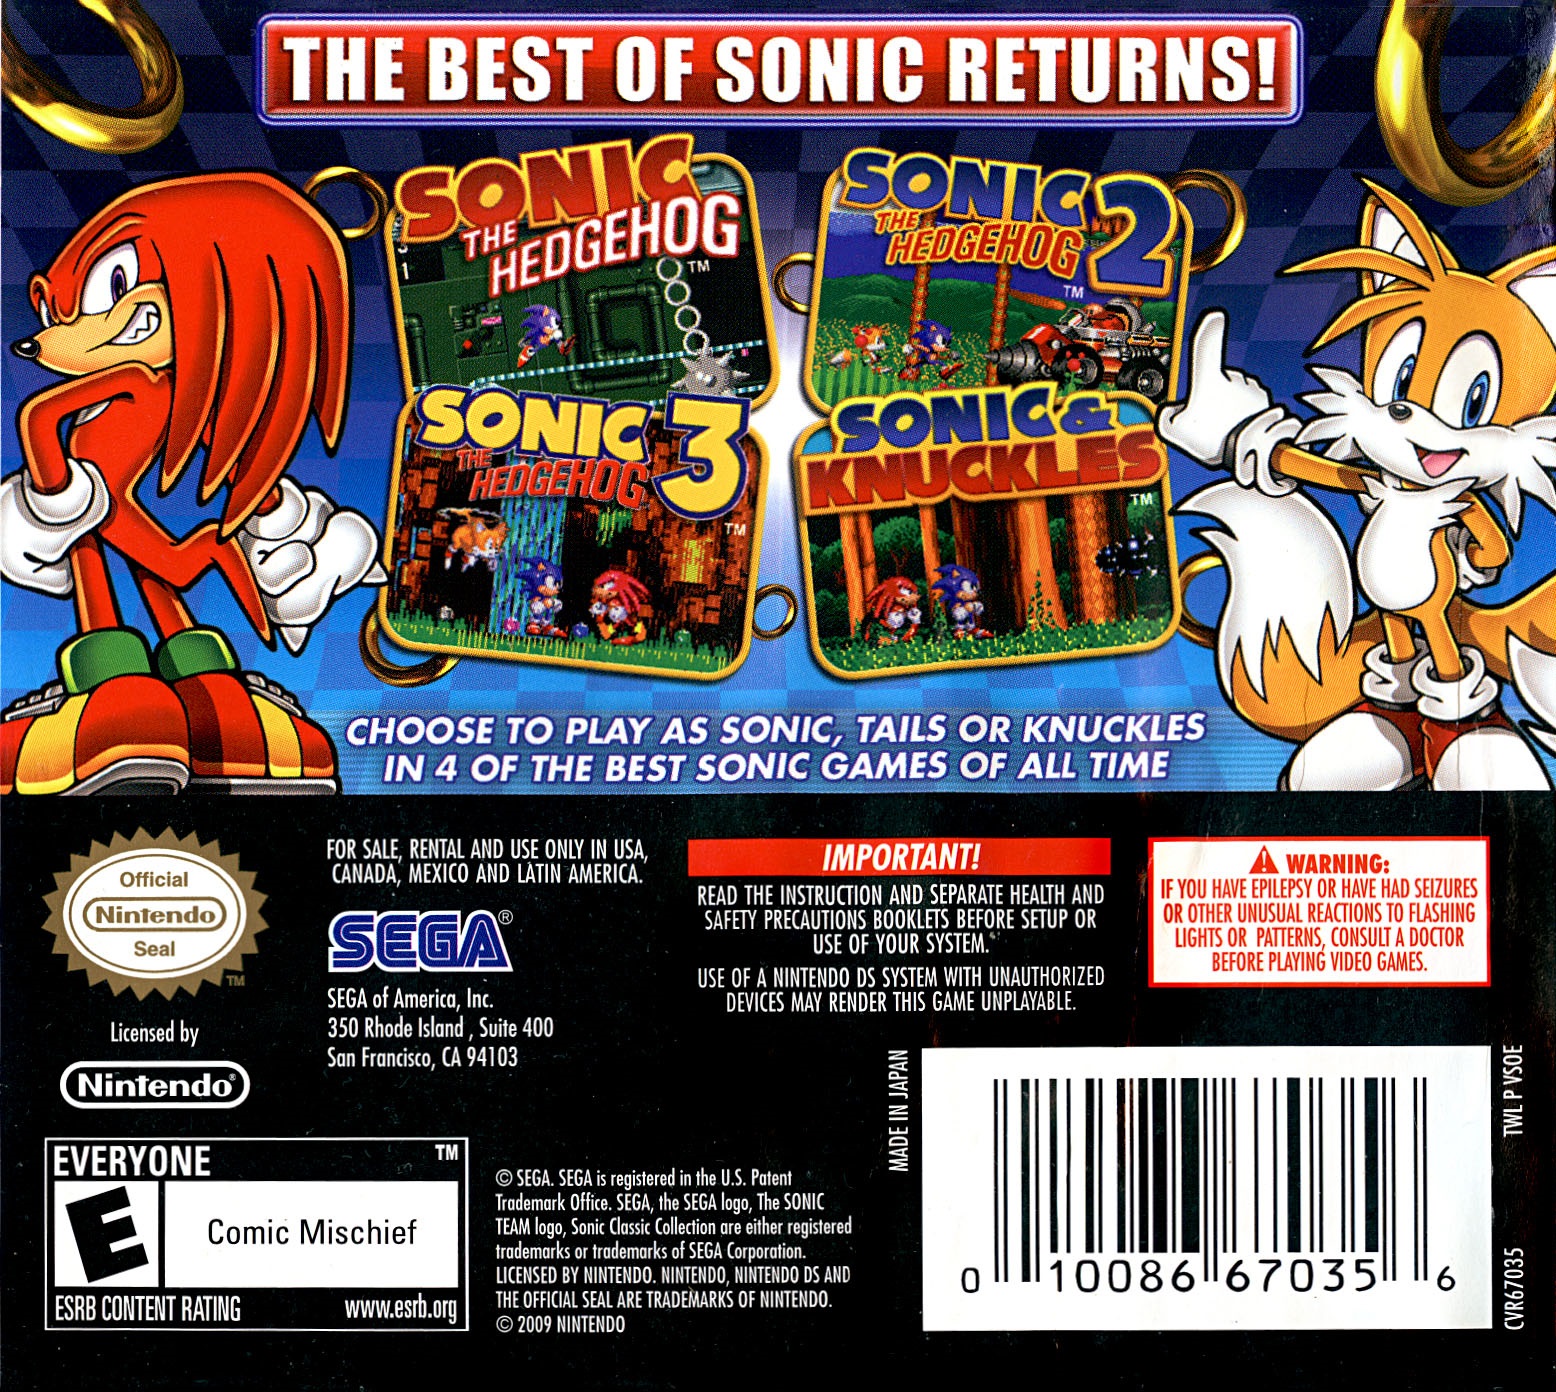 Sonic Classic Collection Details - LaunchBox Games Database